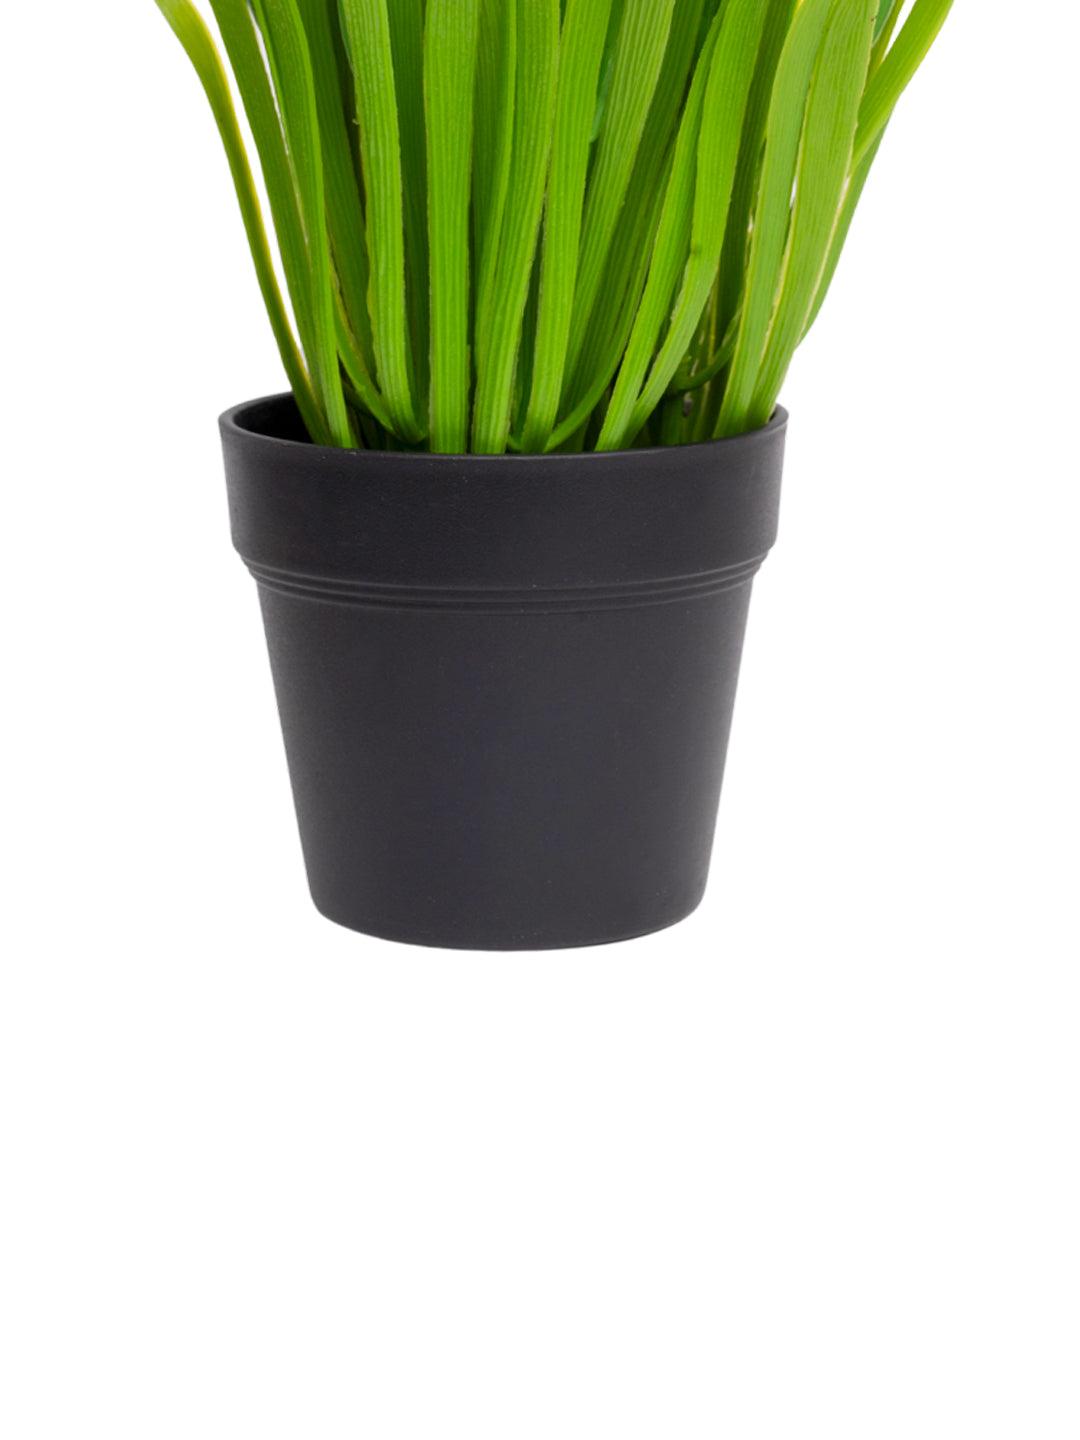 VON CASA Yellow Lily Artificial Potted Plant - MARKET 99